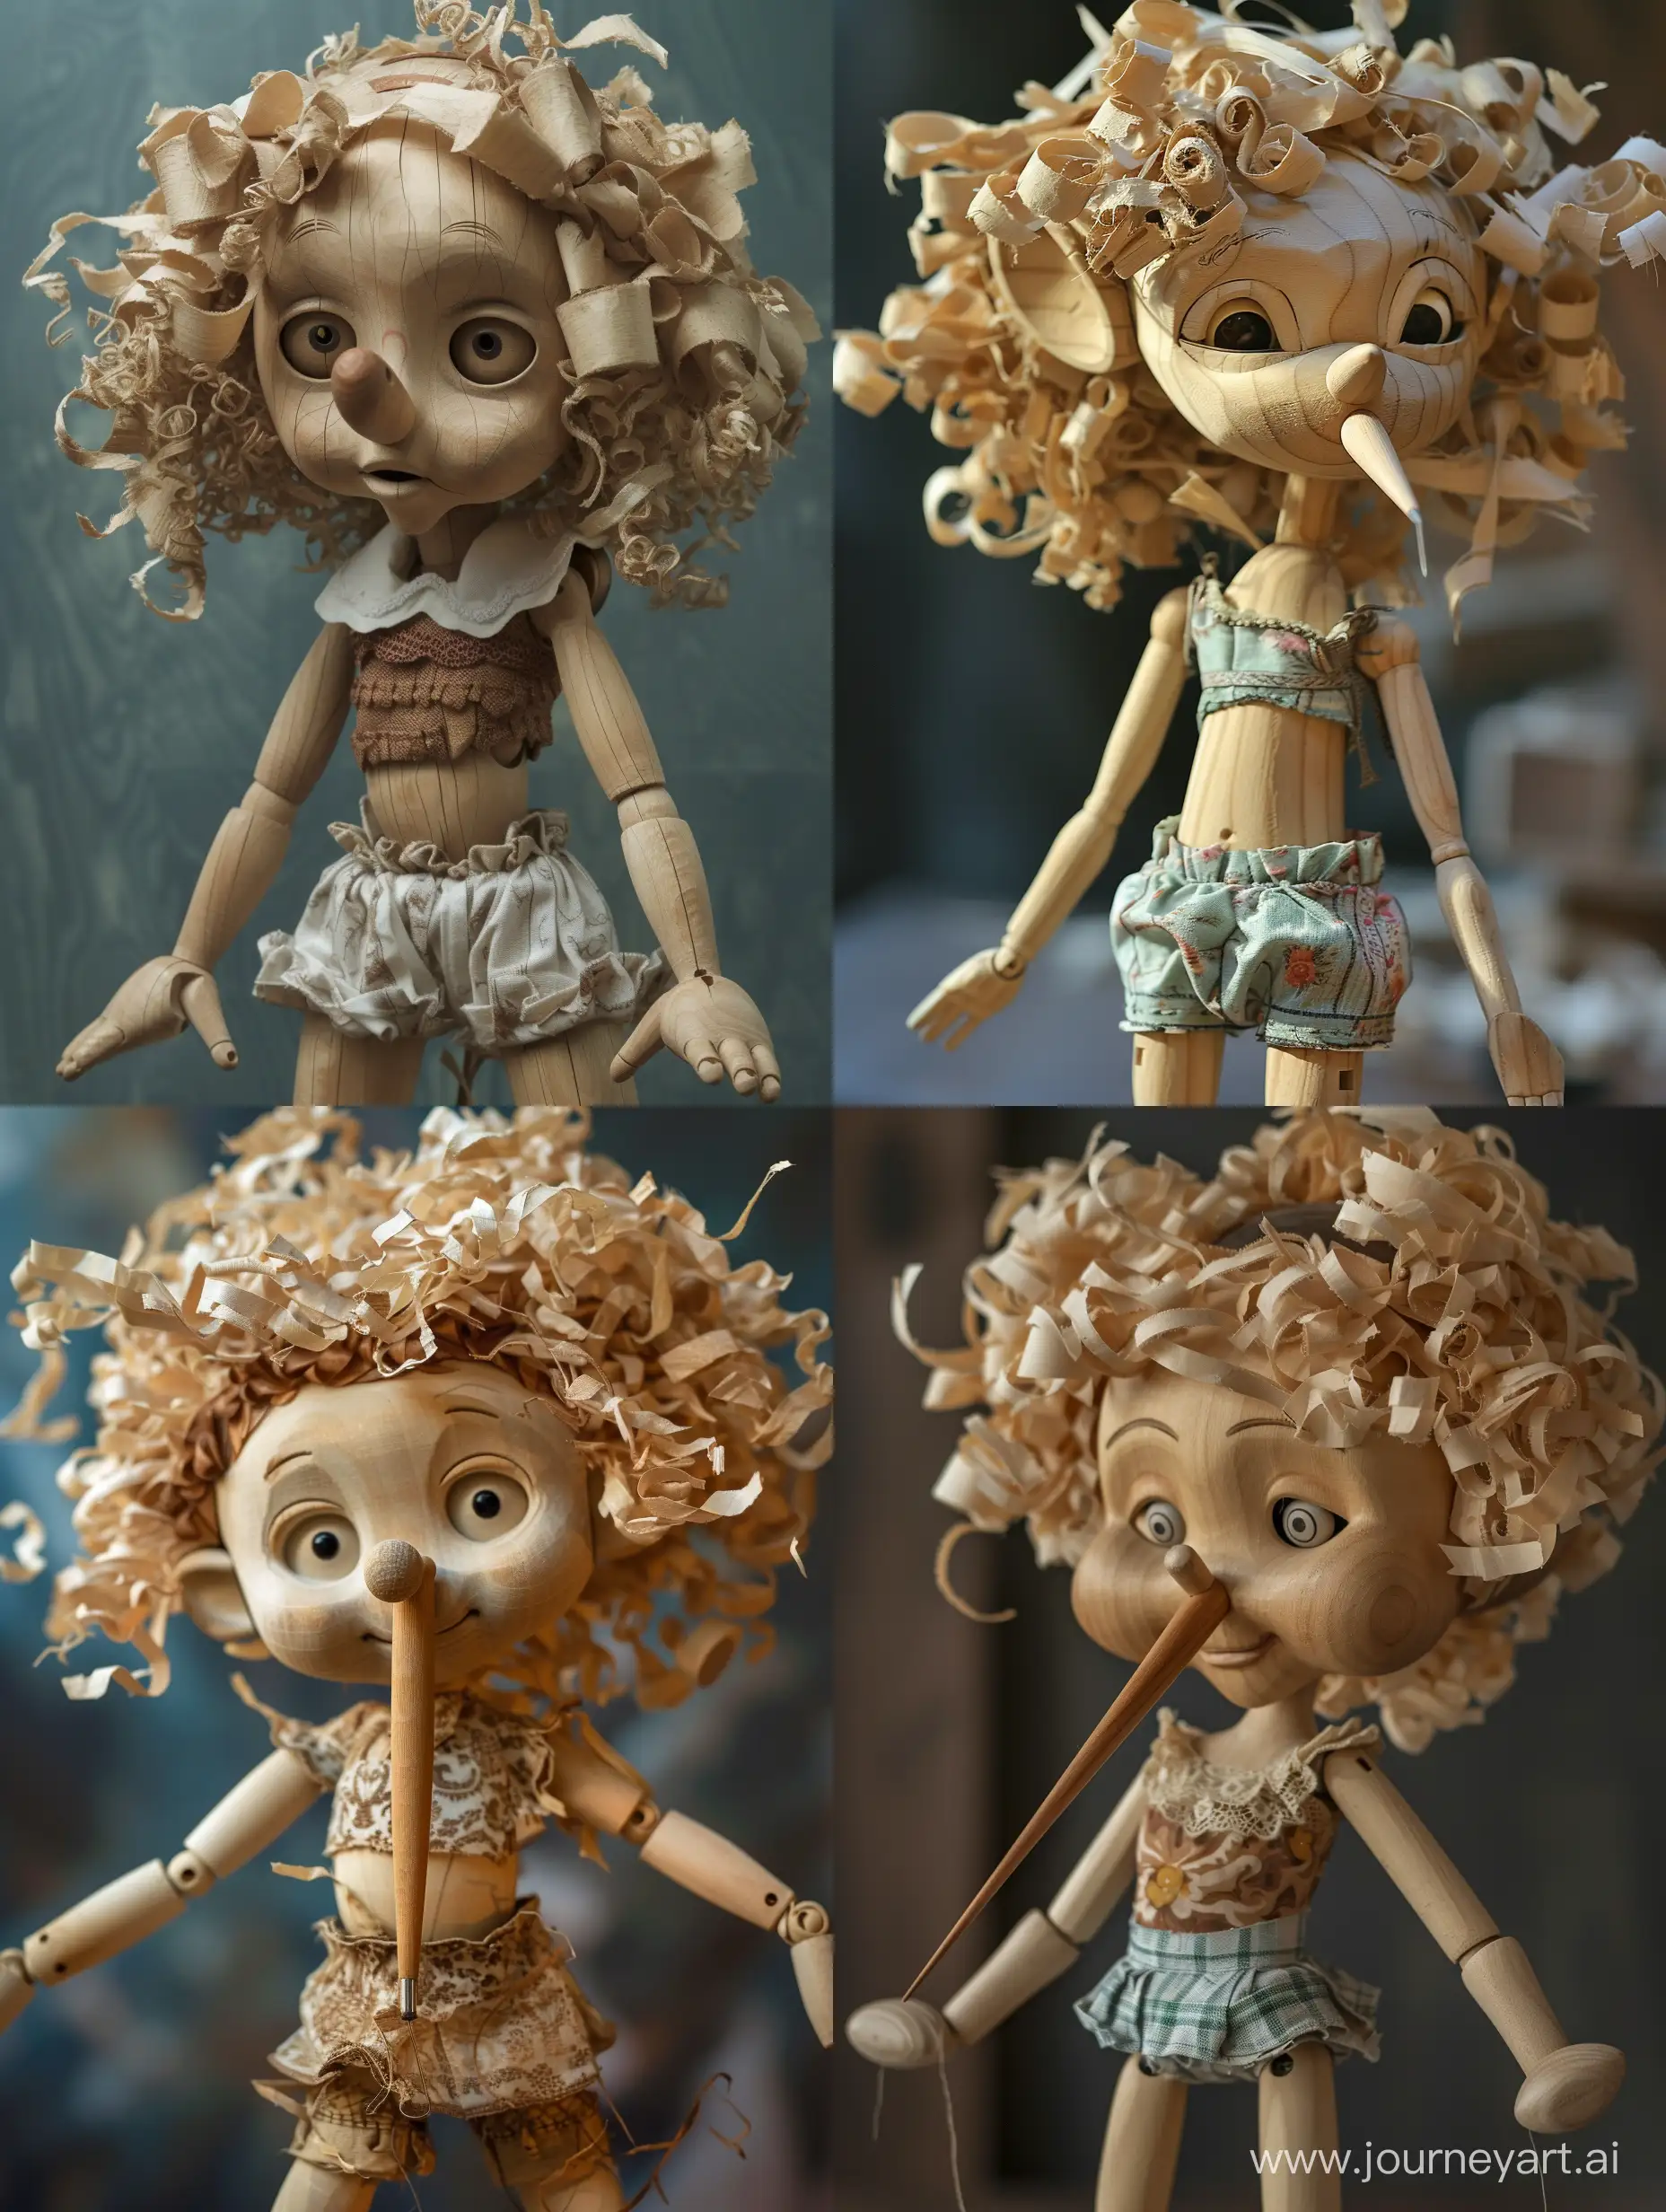 Generate Wooden Pinocchio doll by Carlo Collodi (Le avventure di Pinocchio). Pinocchio is in the character of a girl dressed in a top and shorts. Pinocchio the girl. Pinocchio girl with a very long wooden nose like Pinocchio boy. Curly hair made up of wood shavings from a planer, open eyes